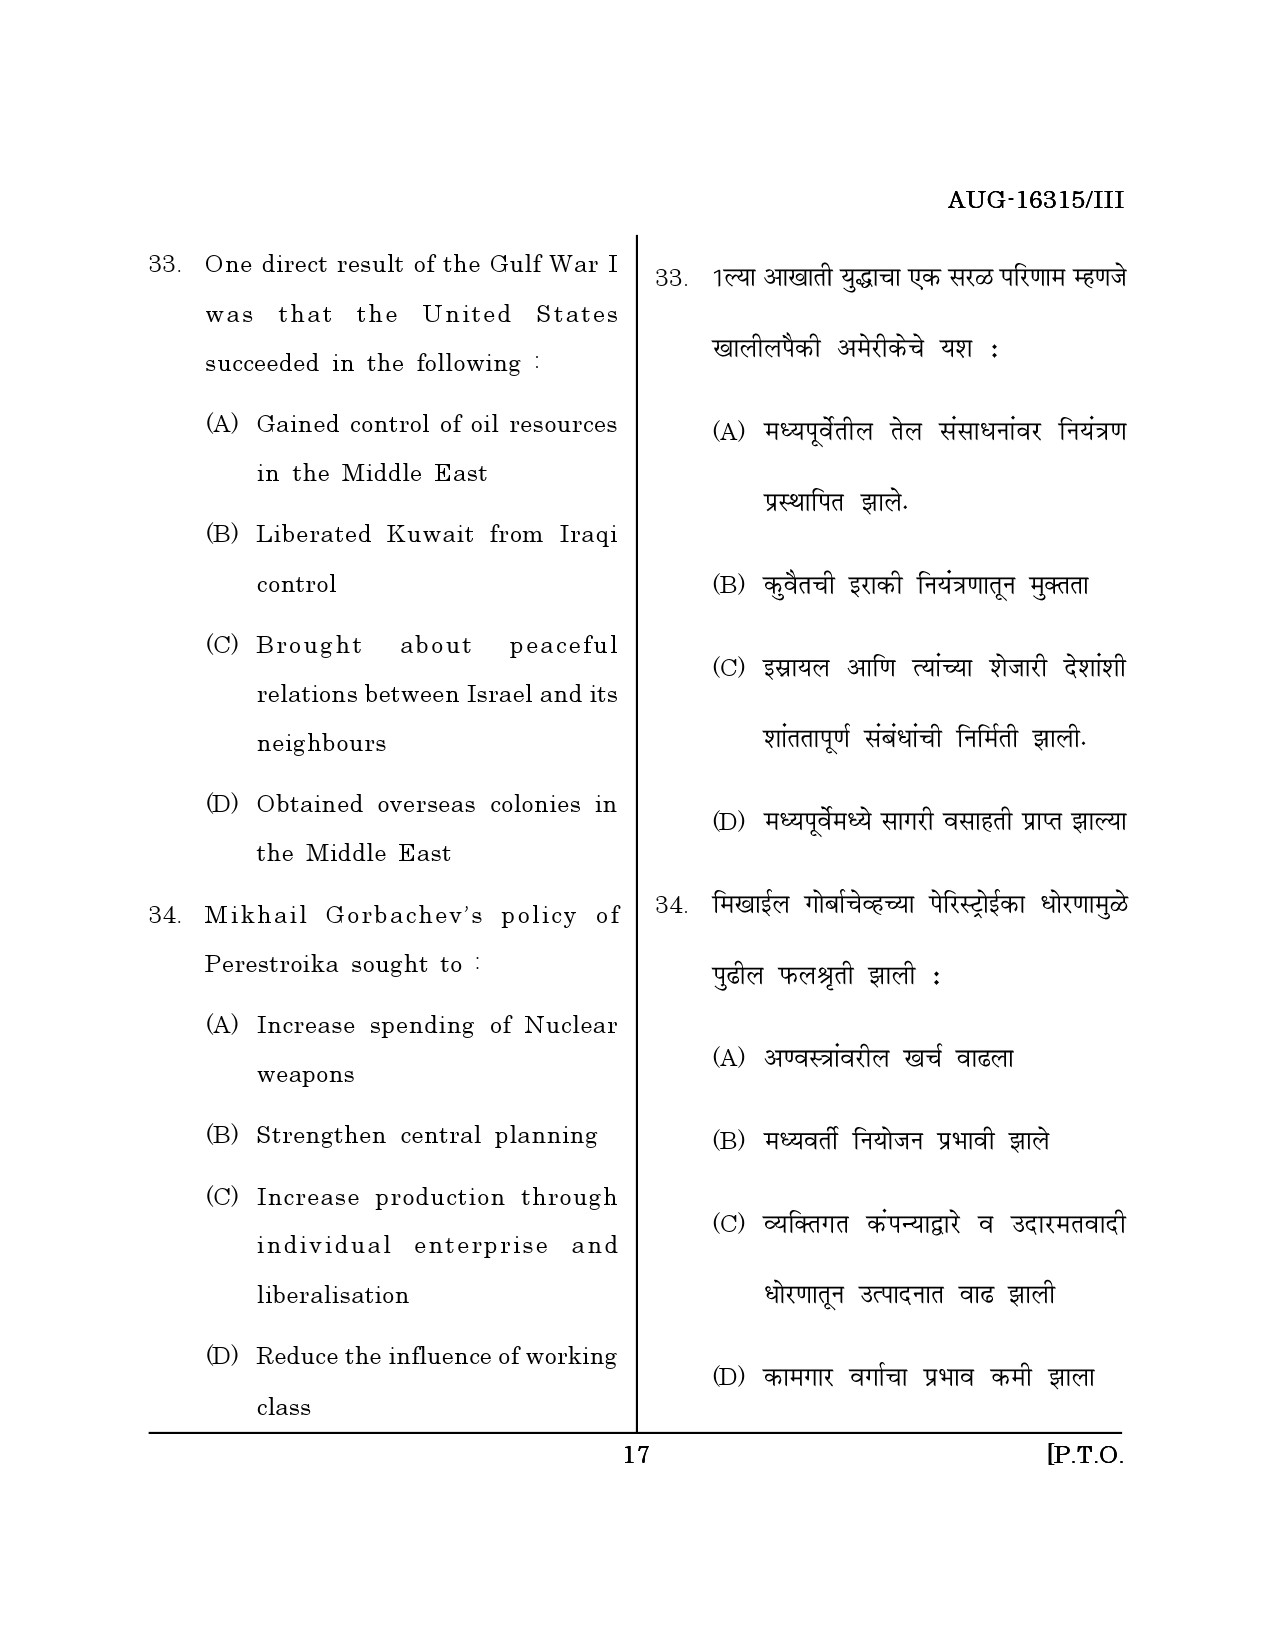 Maharashtra SET Defence and Strategic Studies Question Paper III August 2015 16